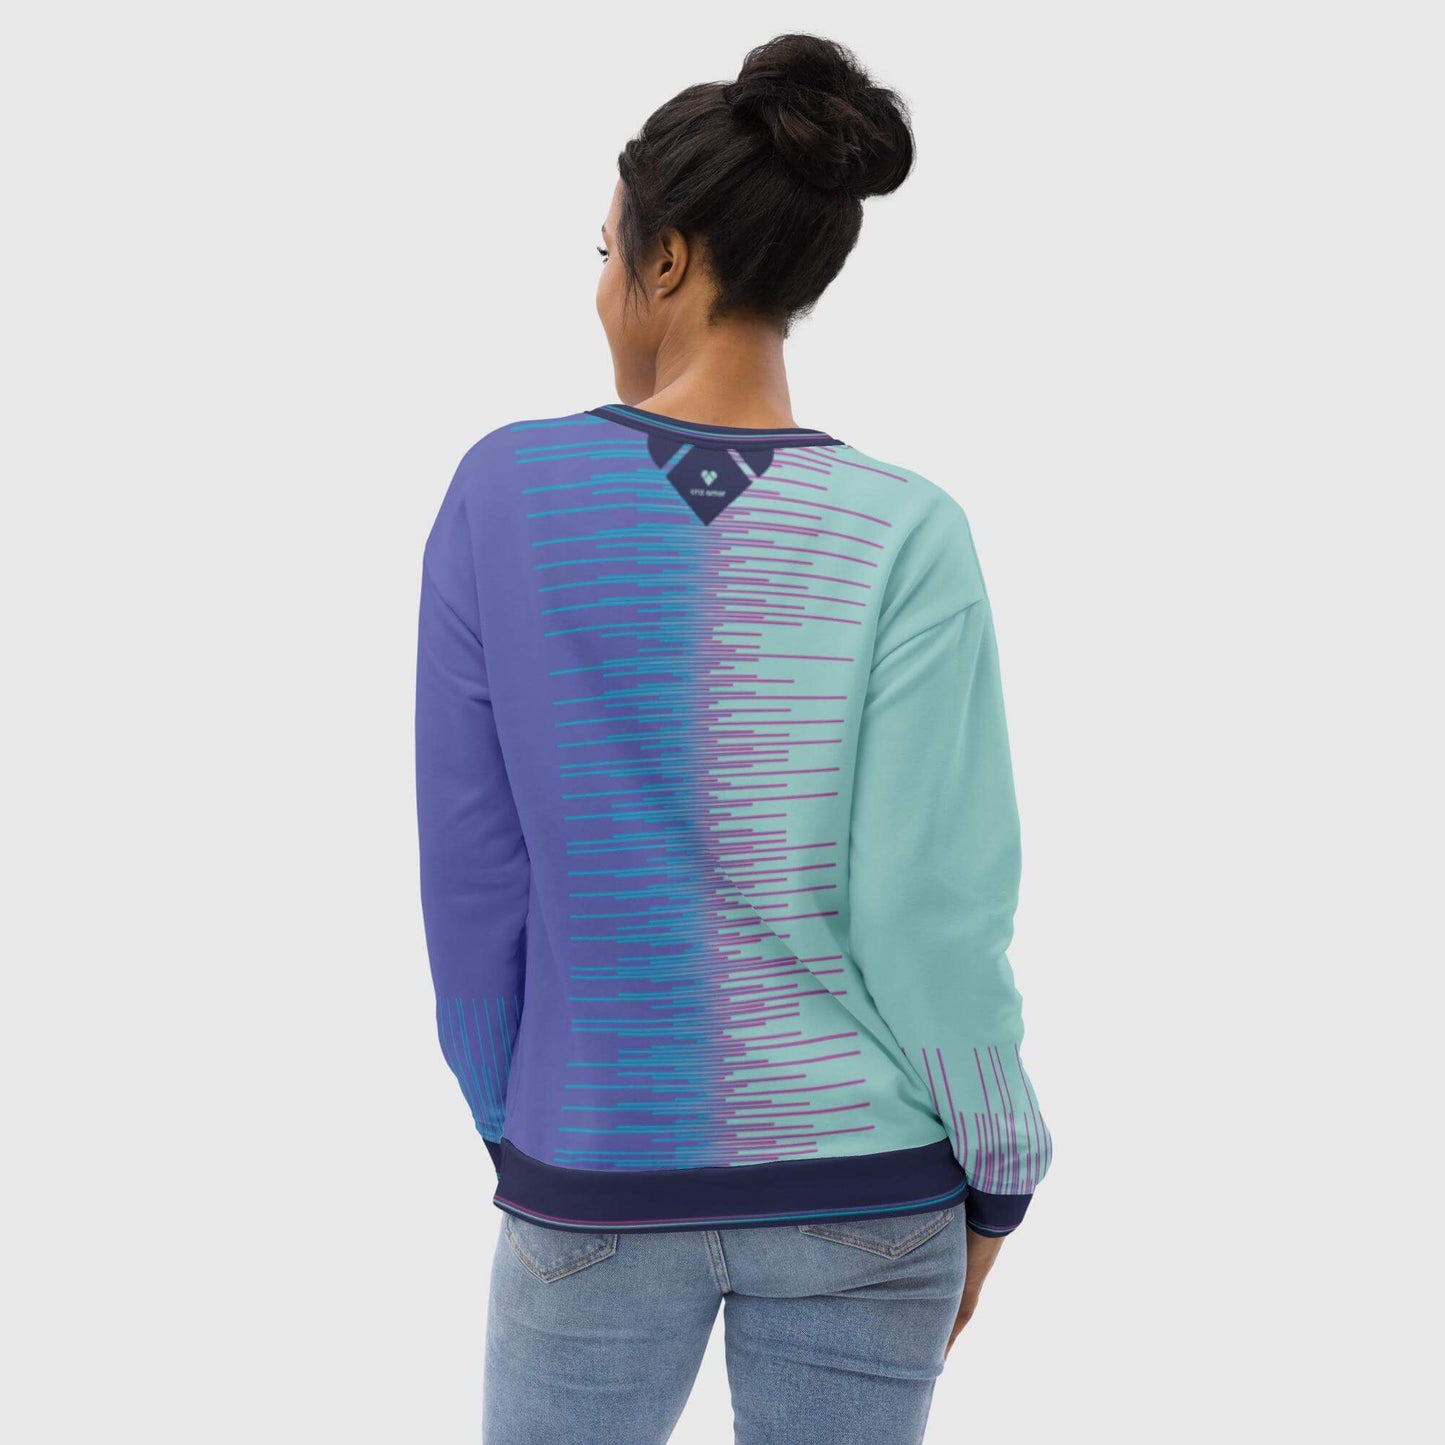 Mix and Match Mint and Periwinkle Sweatshirt